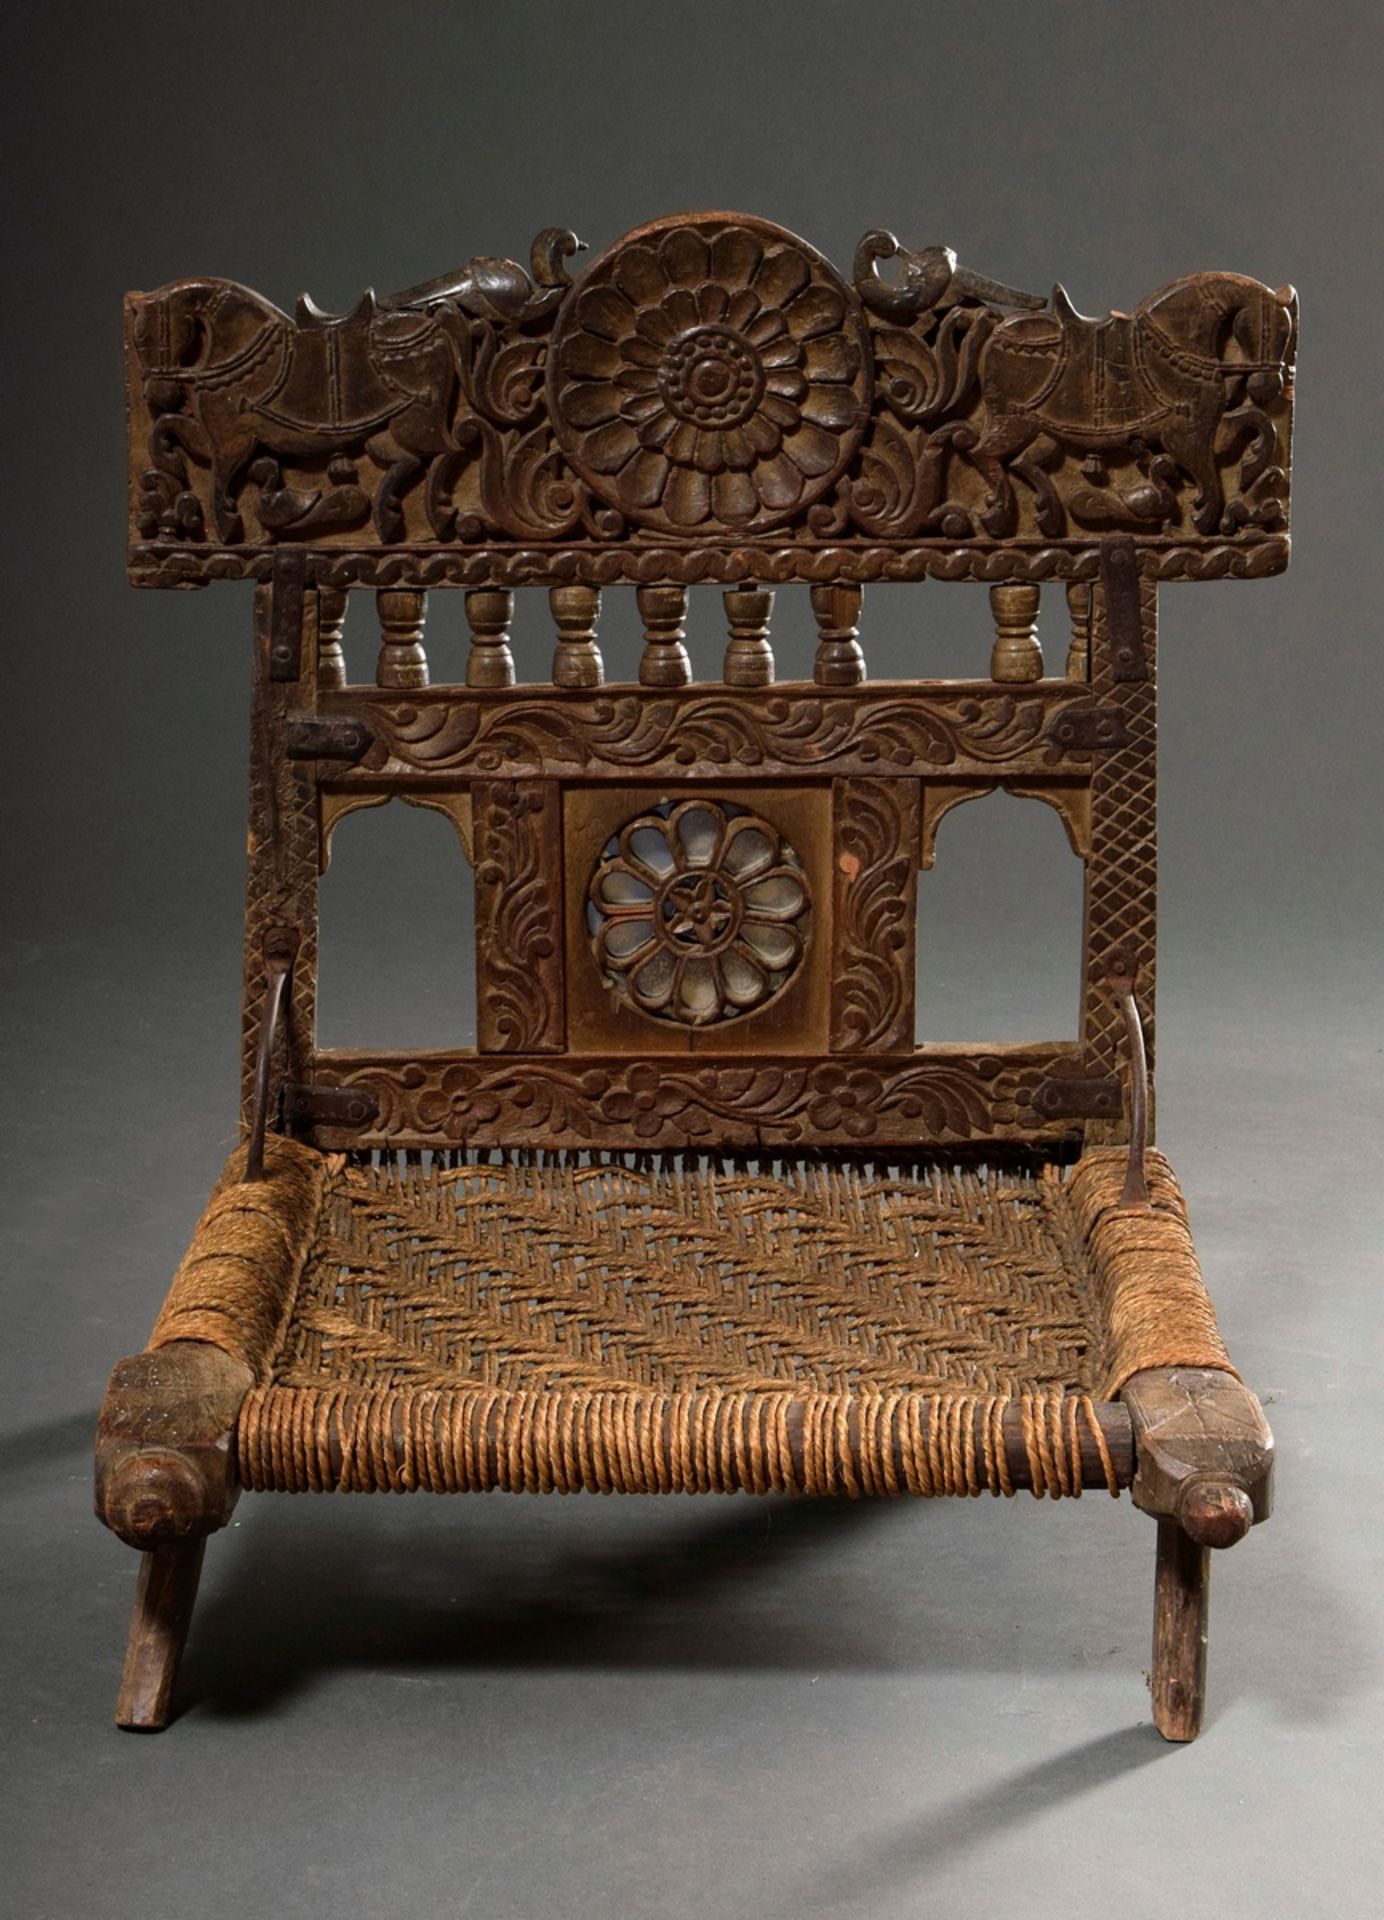 Indian wedding chair with richly carved frame "horses, peacocks and rosettes", around 1900, wood wi - Image 3 of 6